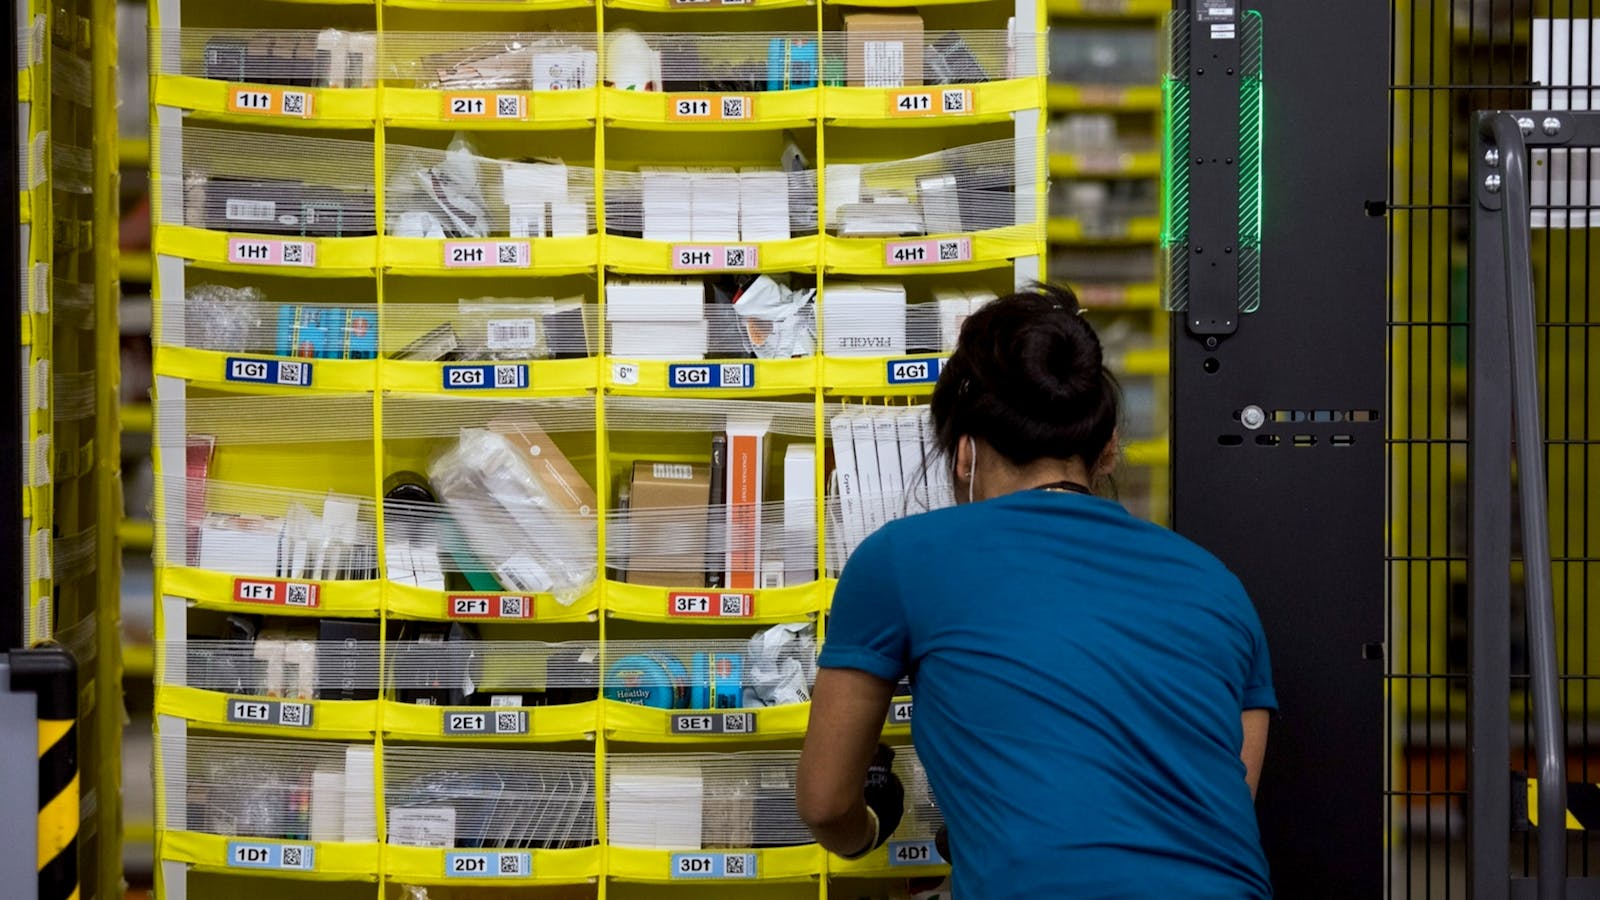 A worker at a picking station at an Amazon warehouse. Photo by Bloomberg